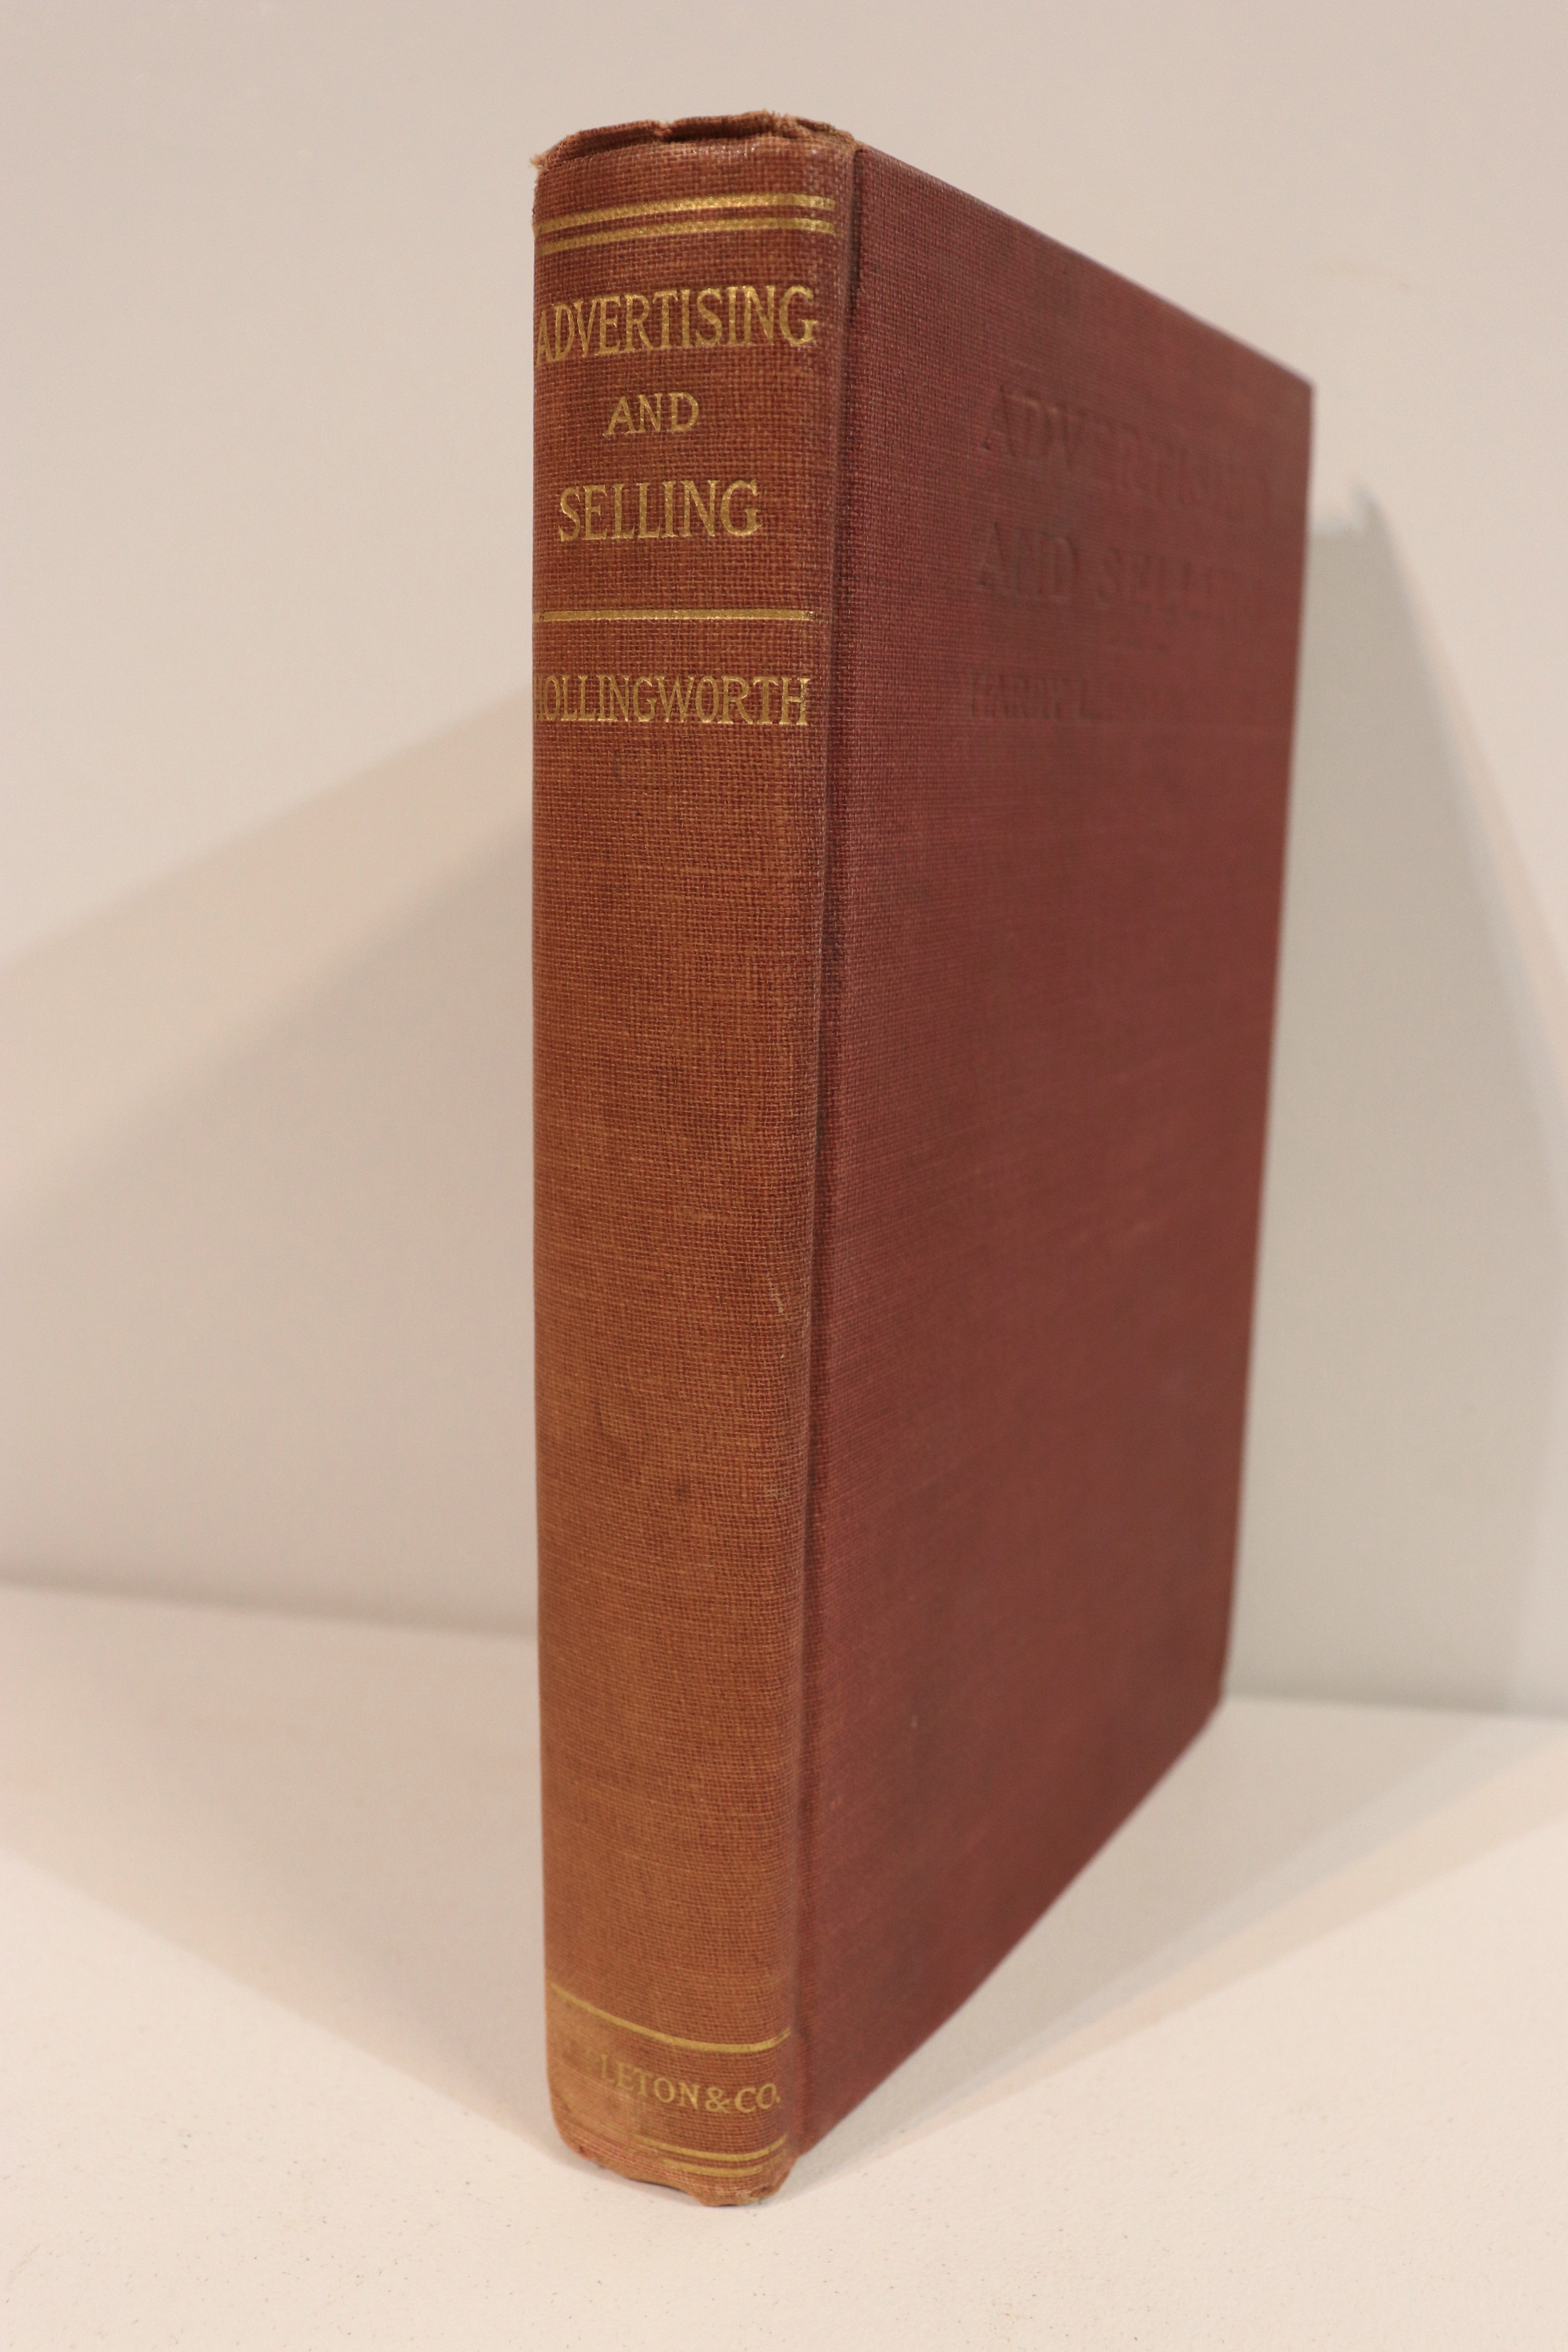 Advertising & Selling - 1920 - Antique Marketing Reference Book